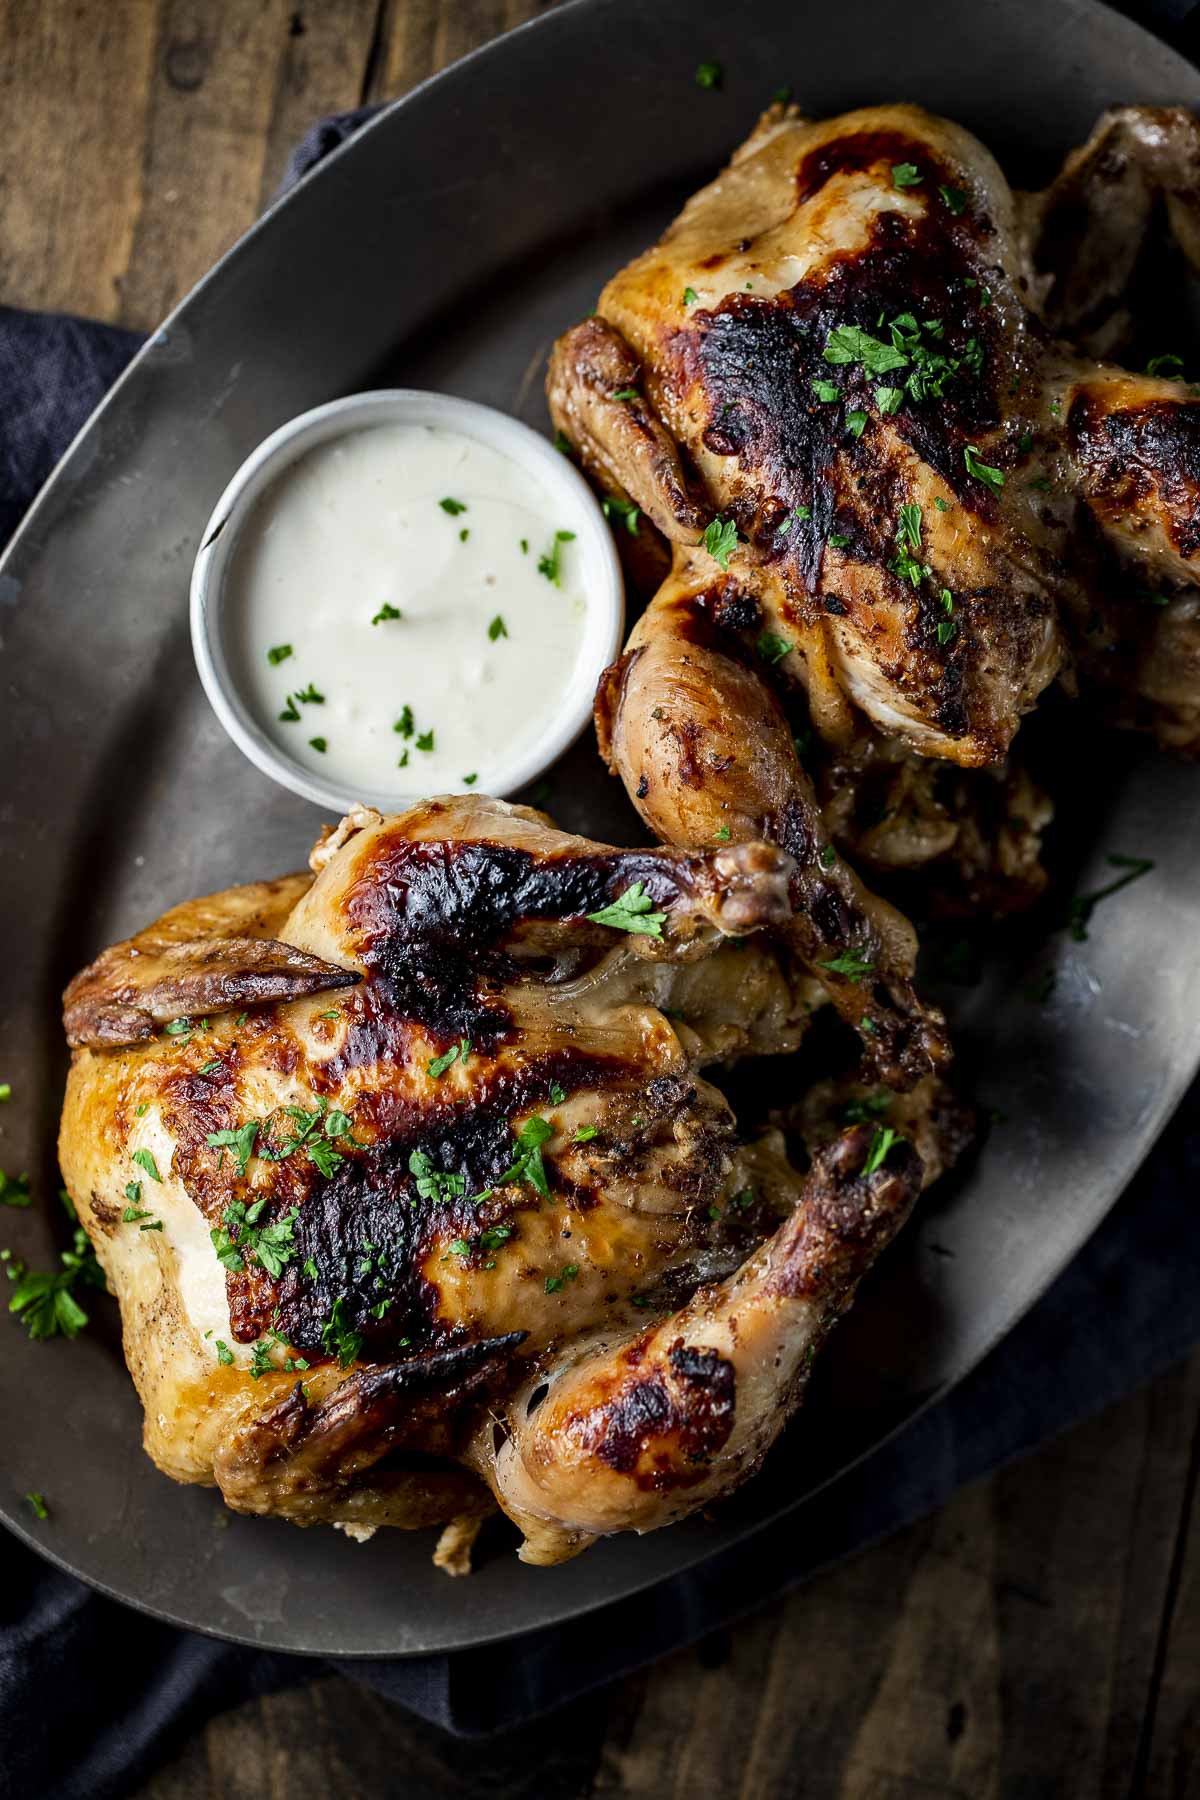 Overhead view of two Cornish hens on a platter with yogurt sauce on the side.